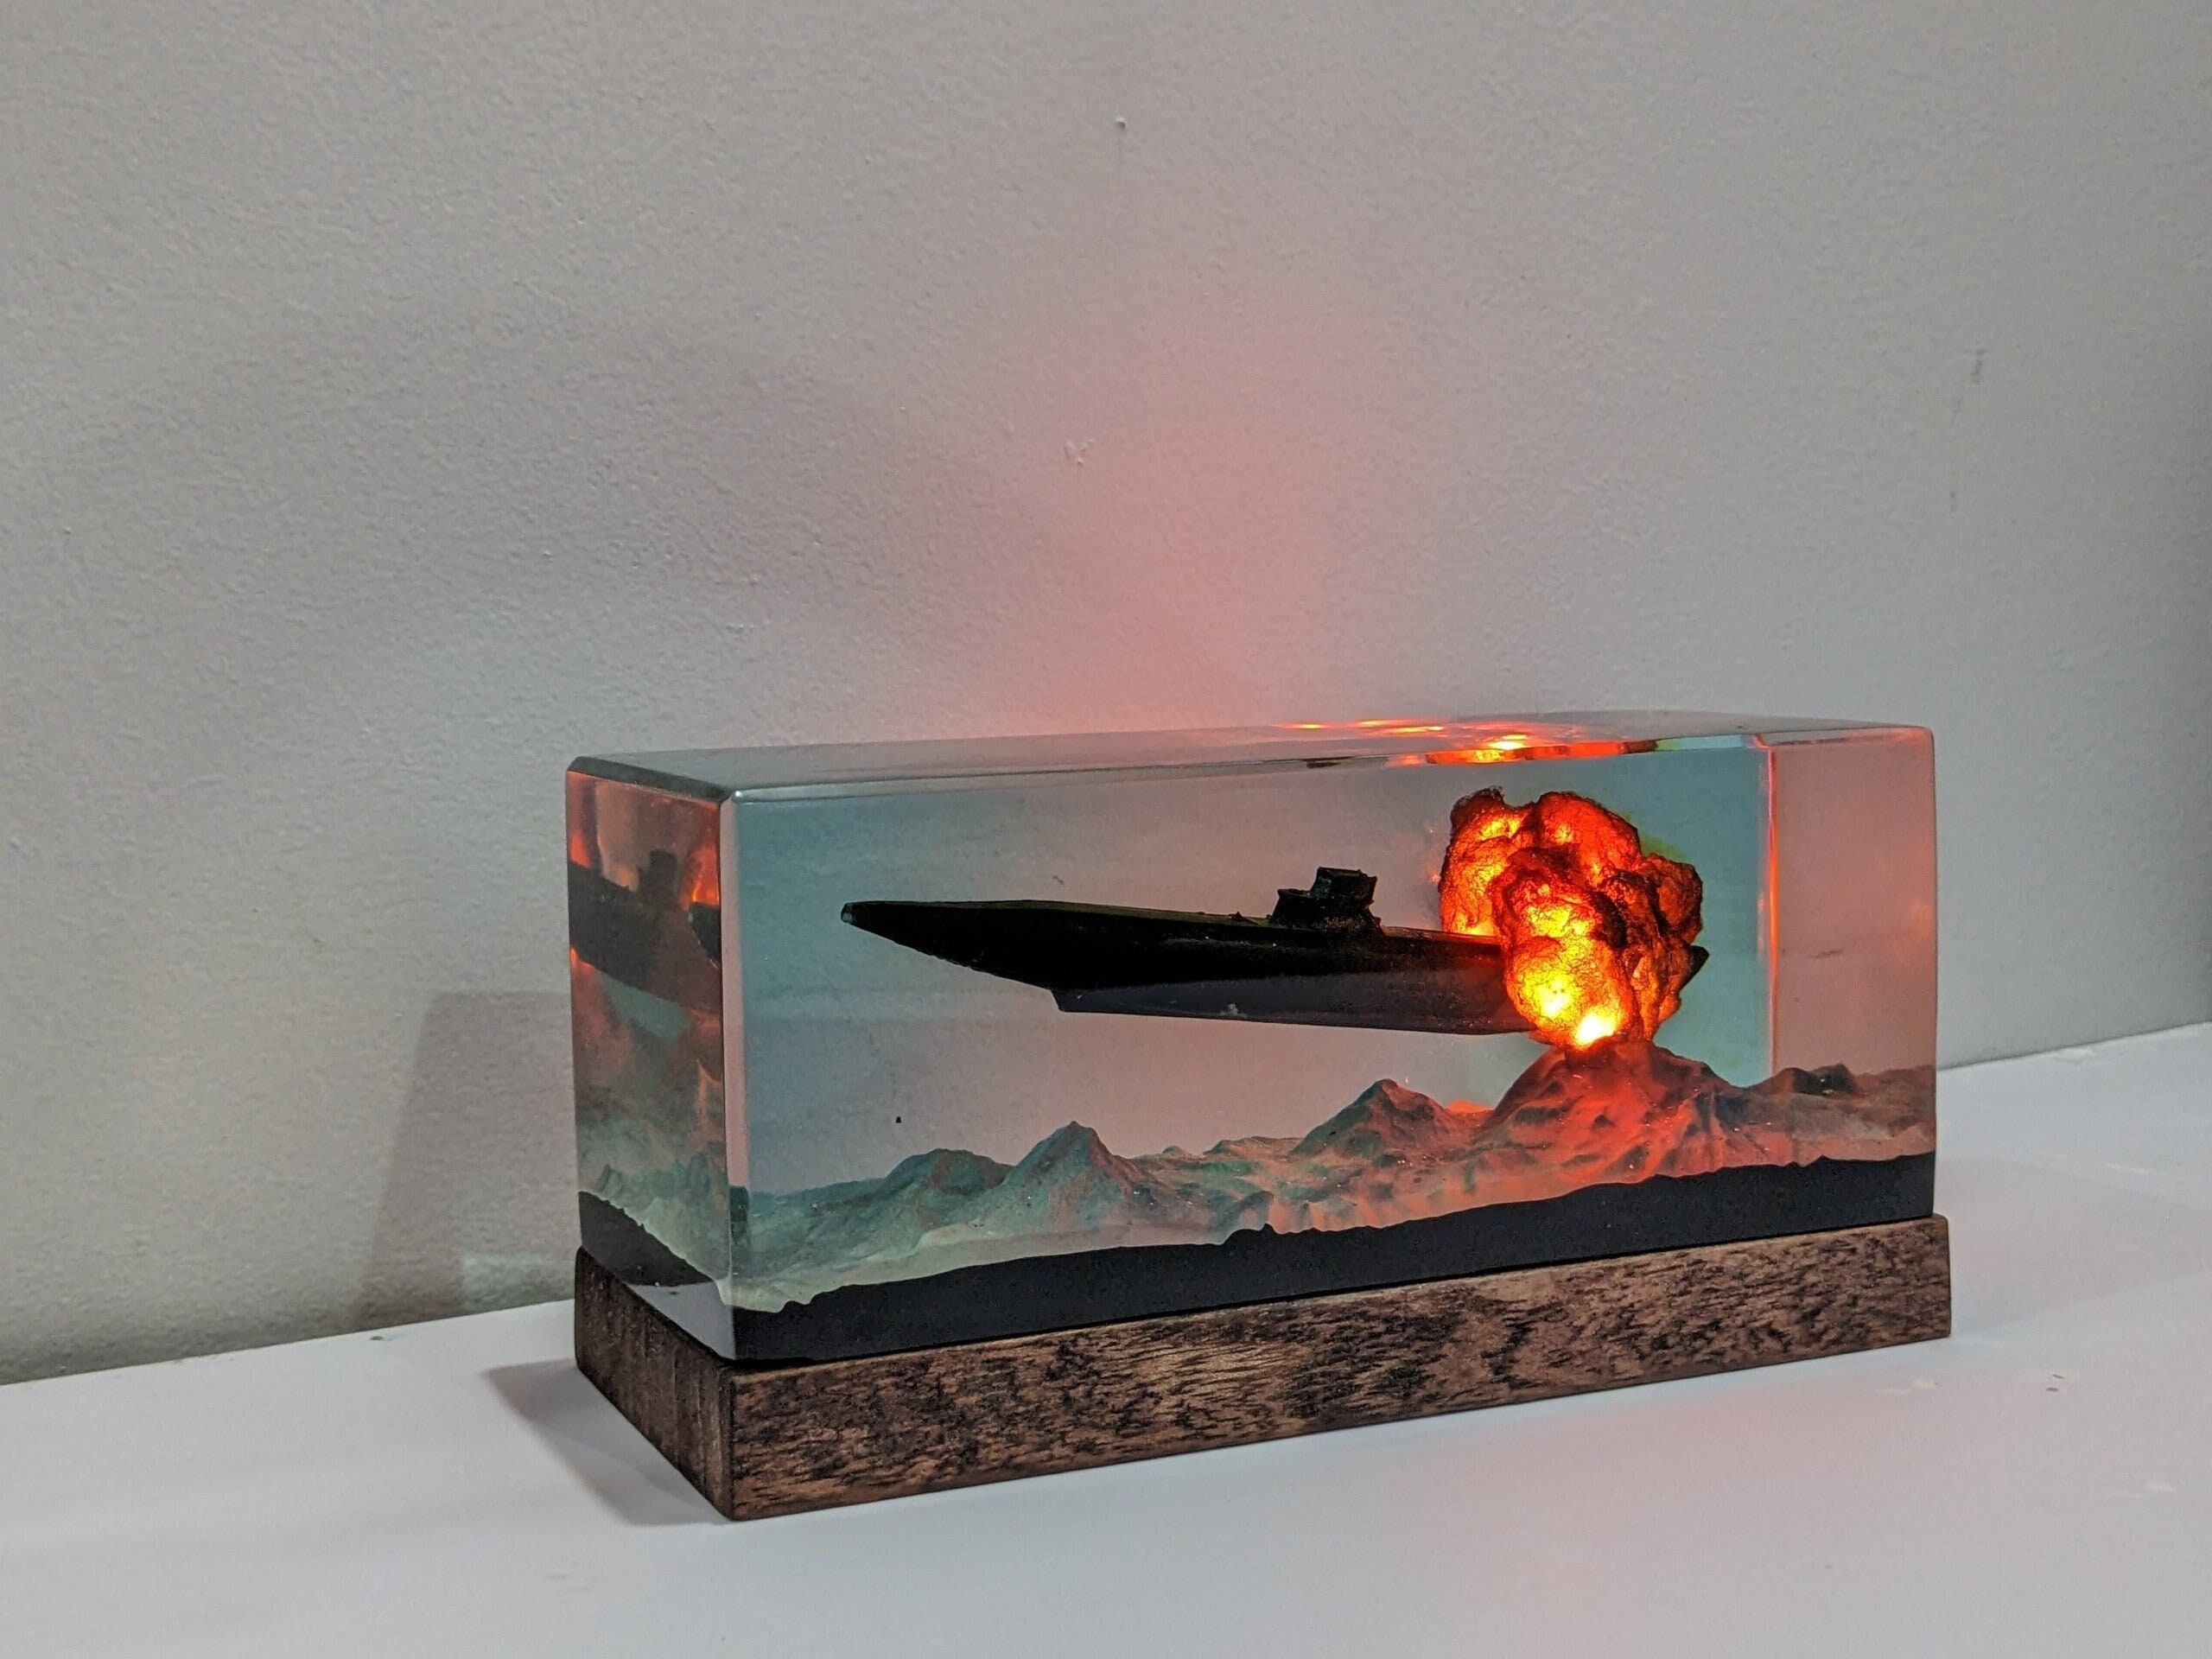 DON'T FORGET. Mixed Media 3D Art Shadow Box DIORAMA Recycled Stuff  Repurposed Cigar Box Junk Things Assemblage 